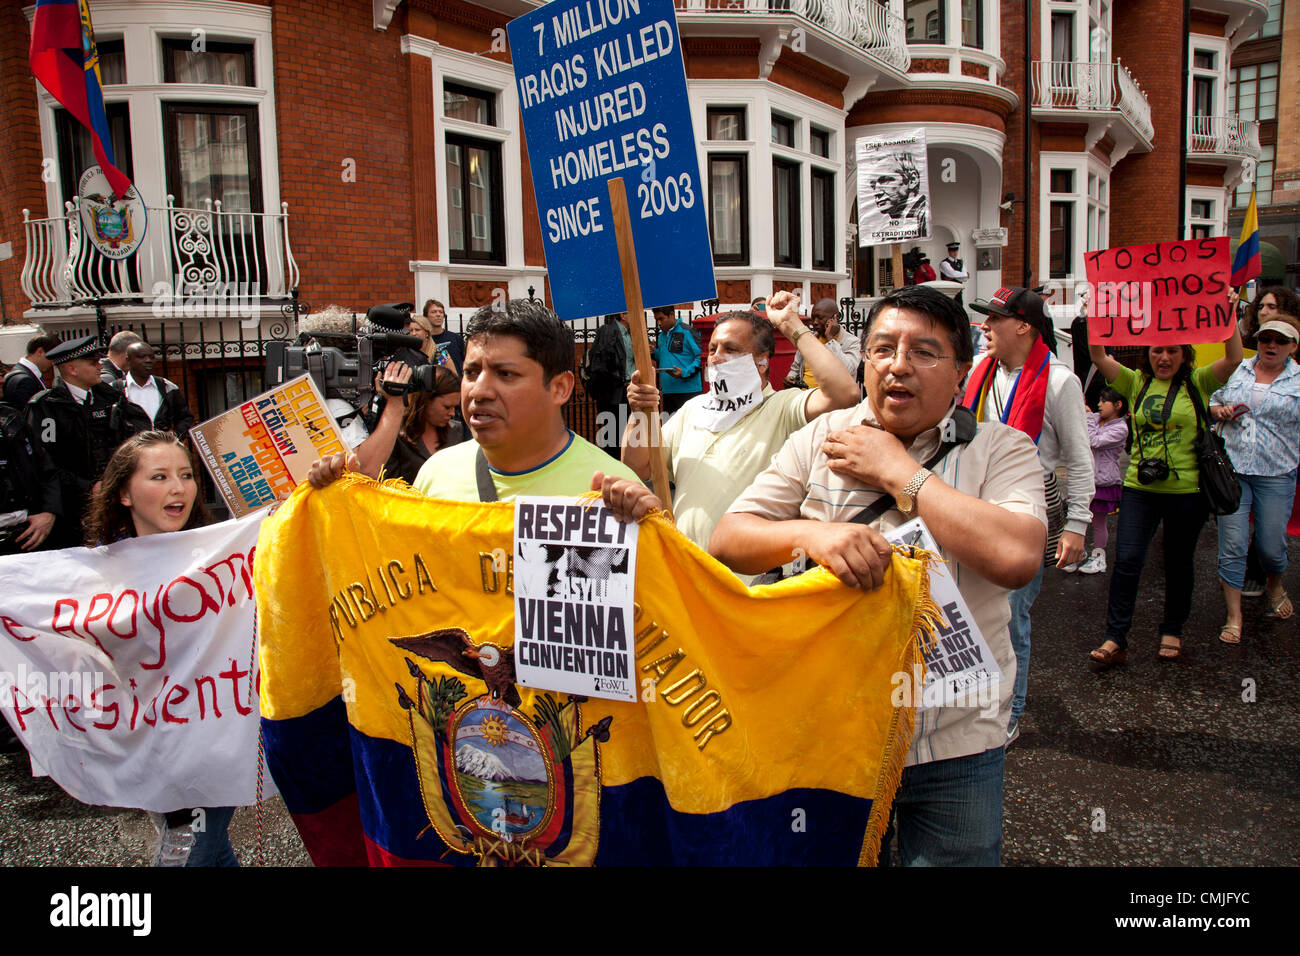 London, UK. Thursday 16th August 2012. Supporters of Julian Assange shout in protest with their flag outside the Ecuador Embassy. Stock Photo